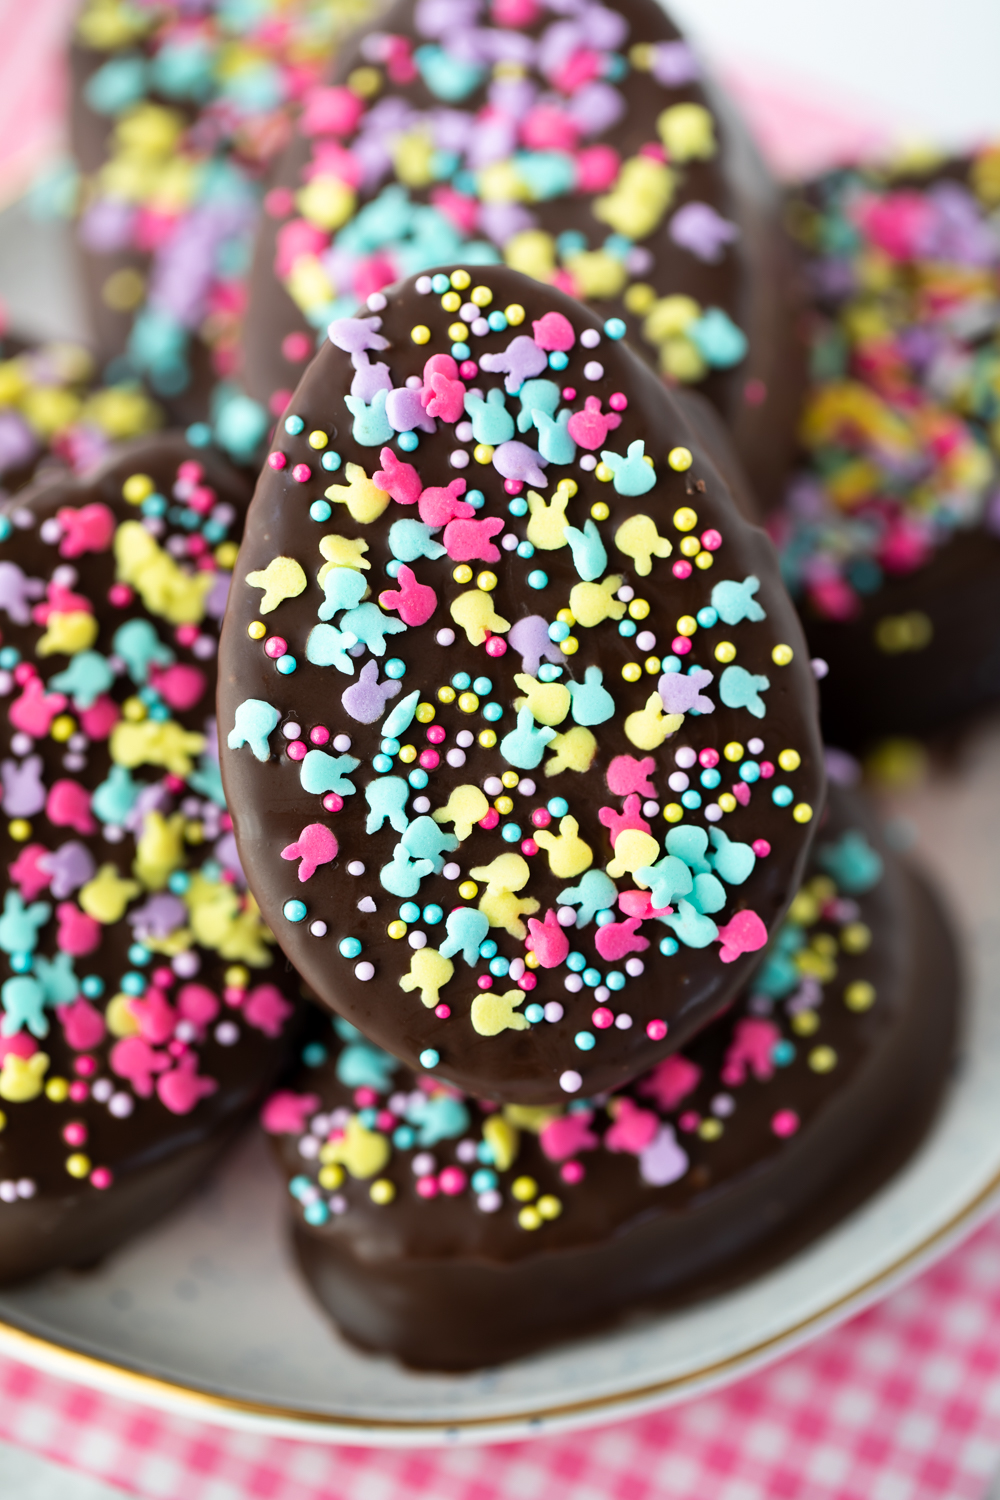 homemade marshmallows cut out in an Easter egg shape dipped in chocolate and decorated with sprinkles